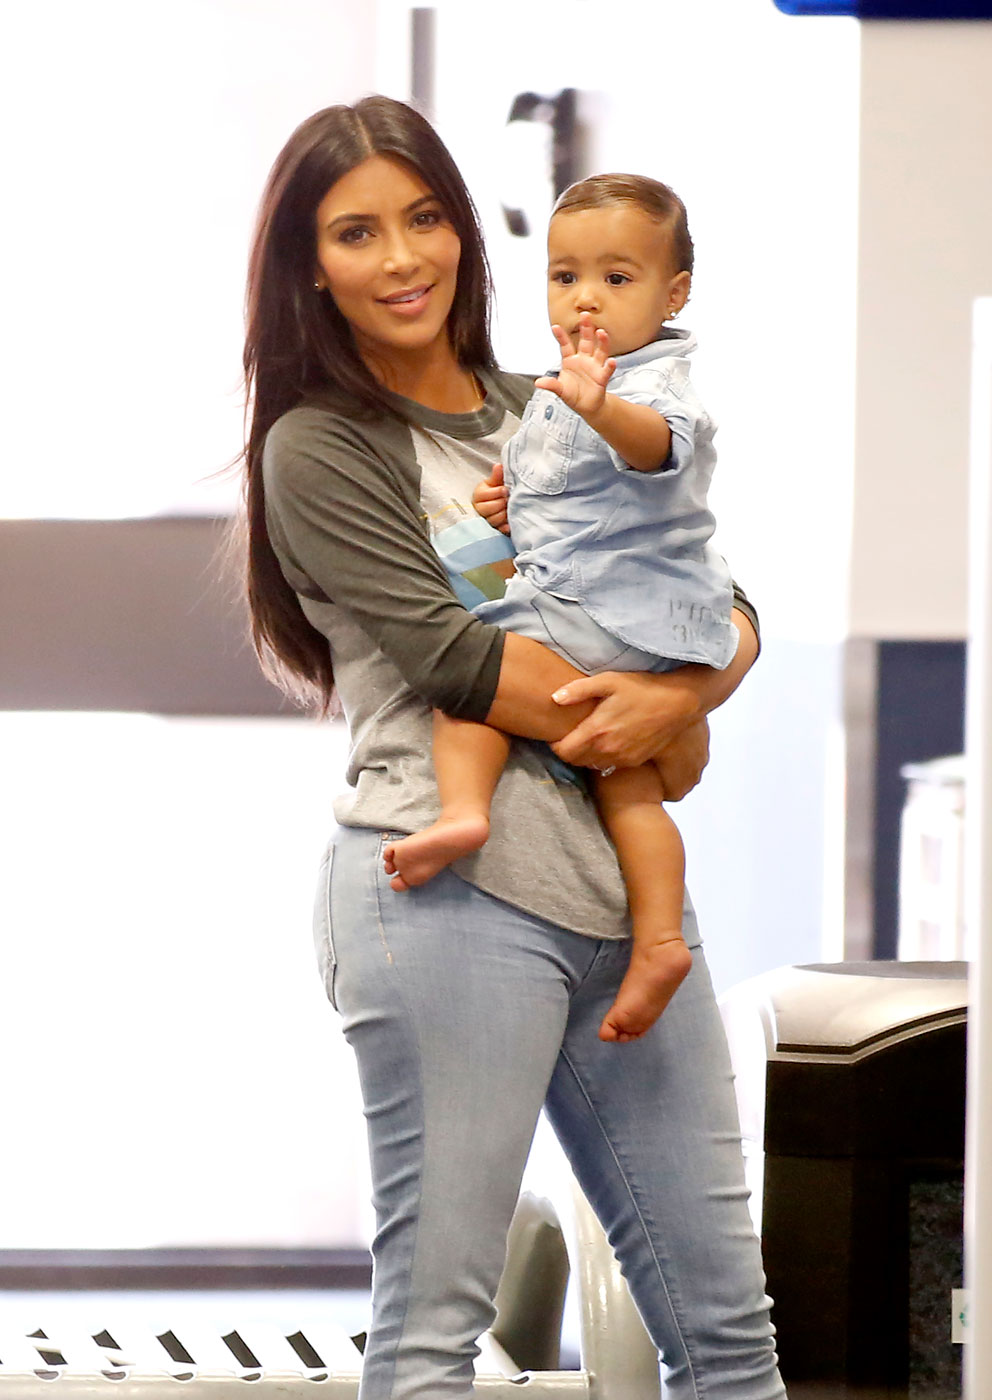 Kim Kardashian holds her 14-month-old daughter, North West as they make their way through Burbank Airport in Los Angeles on Aug. 7, 2014.